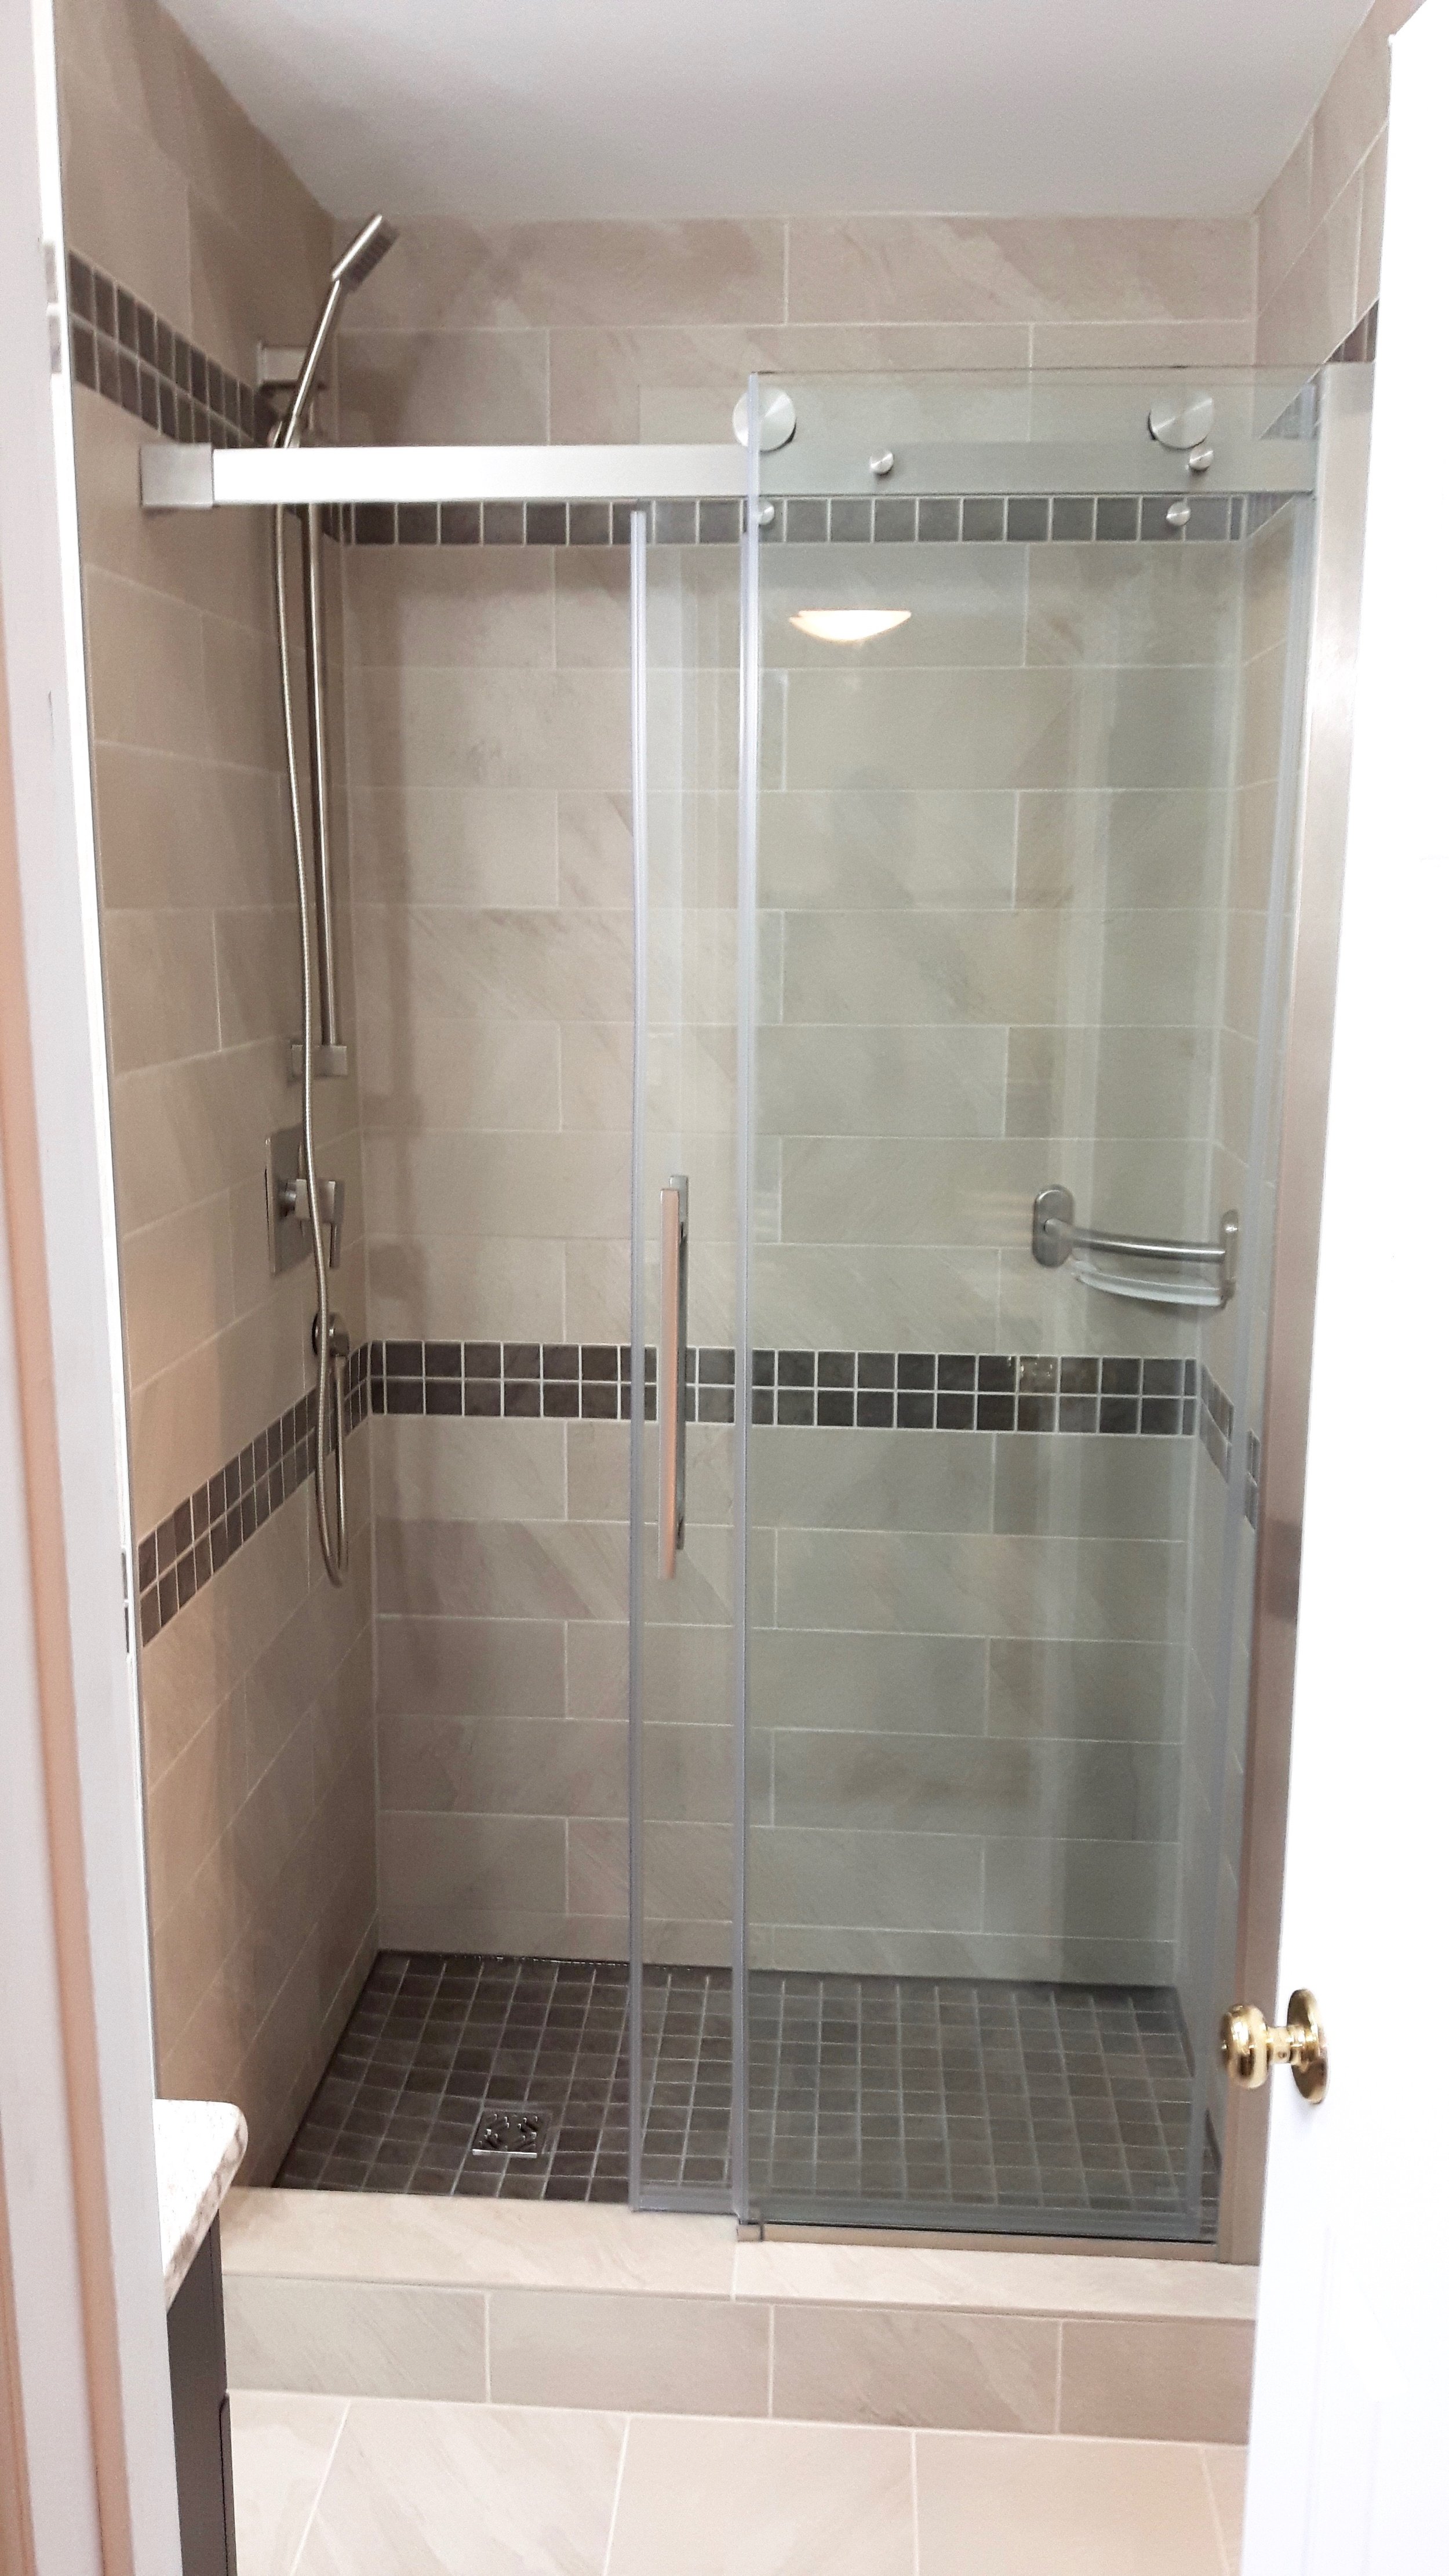 Shower stall with built-in bar/storage shelf